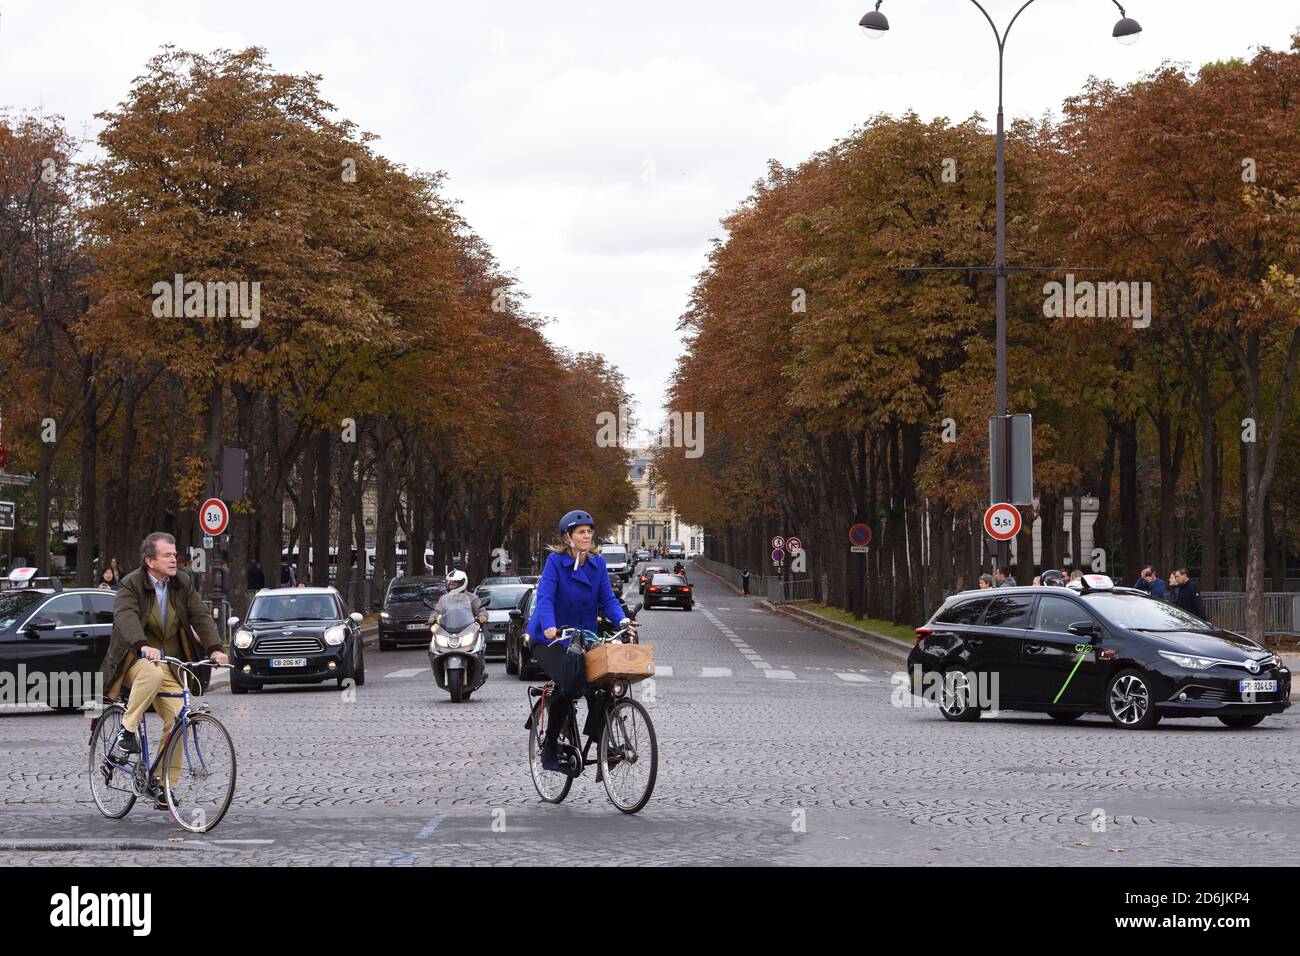 Paris, France: A couple riding bicycles with other traffic on the road on Champs Elysees avenue on a cloudy day Stock Photo